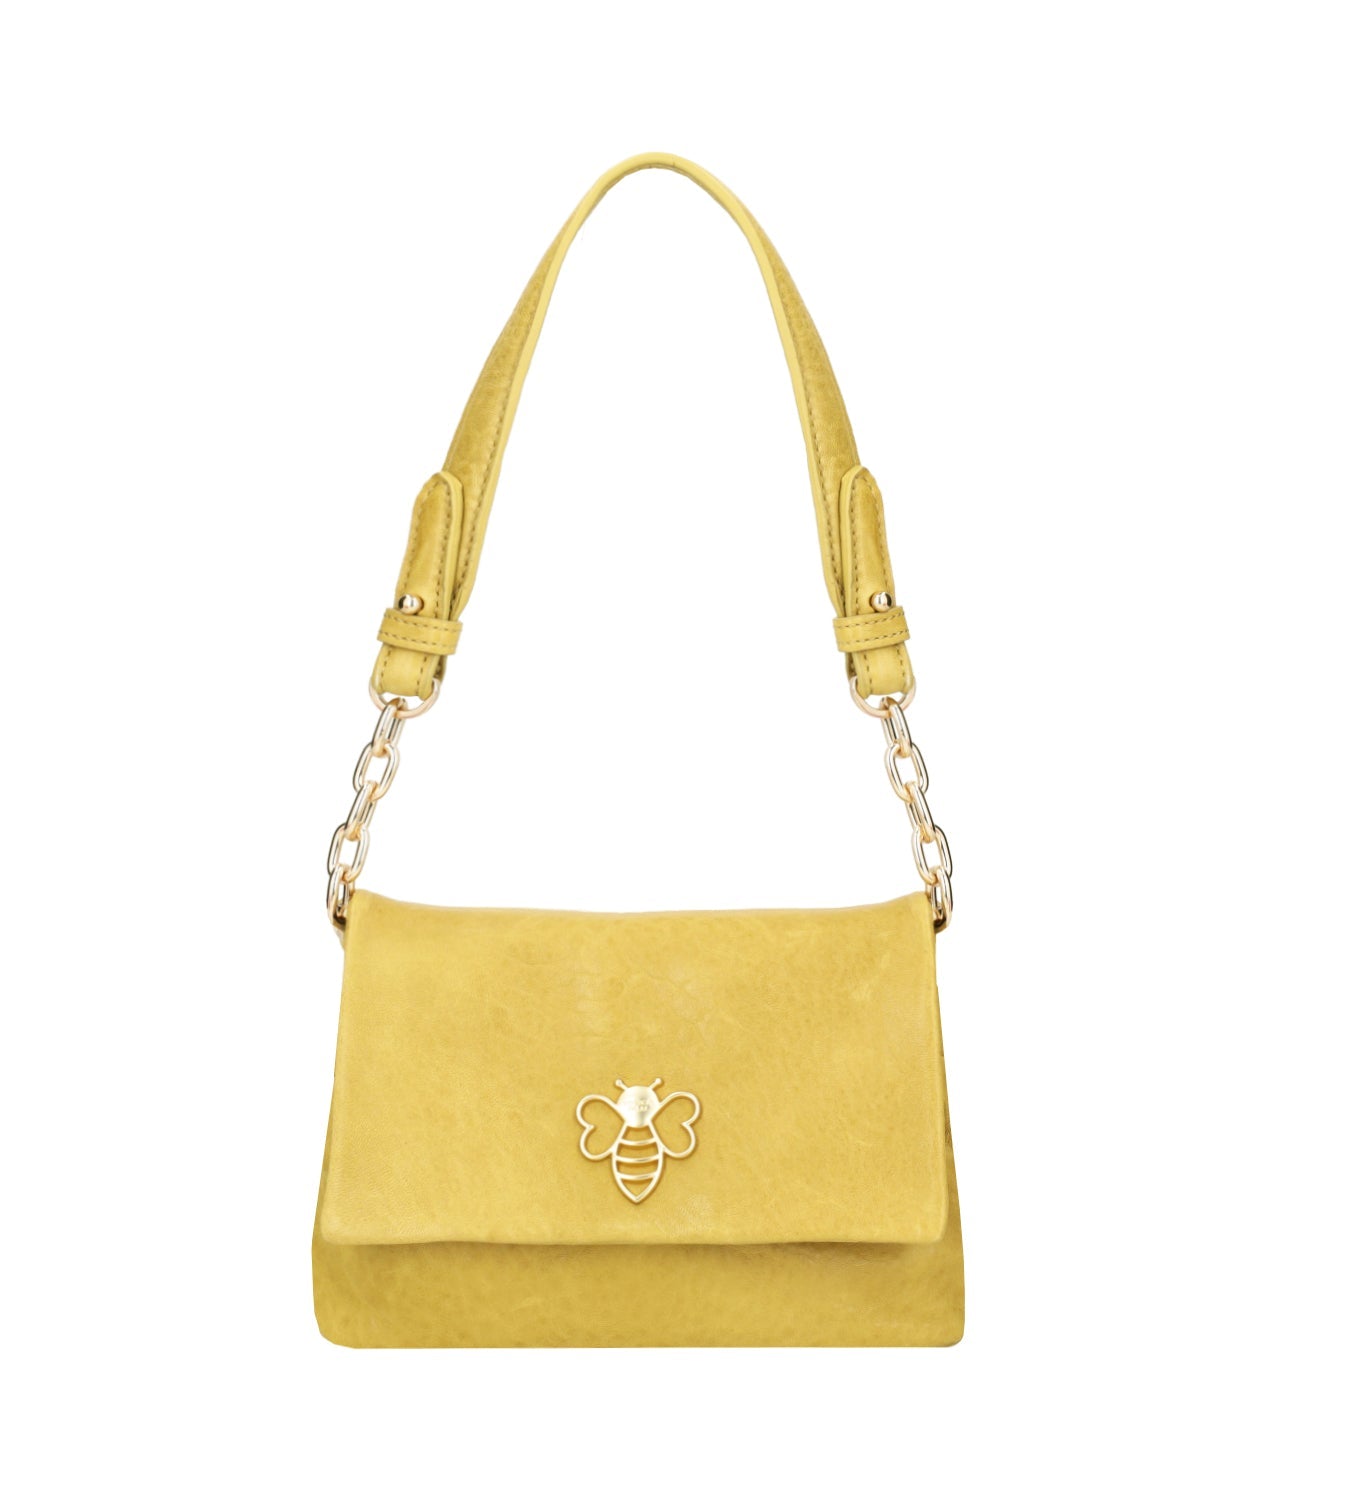 YELLOW GLADIOLO CROSSBODY BAG IN LEATHER